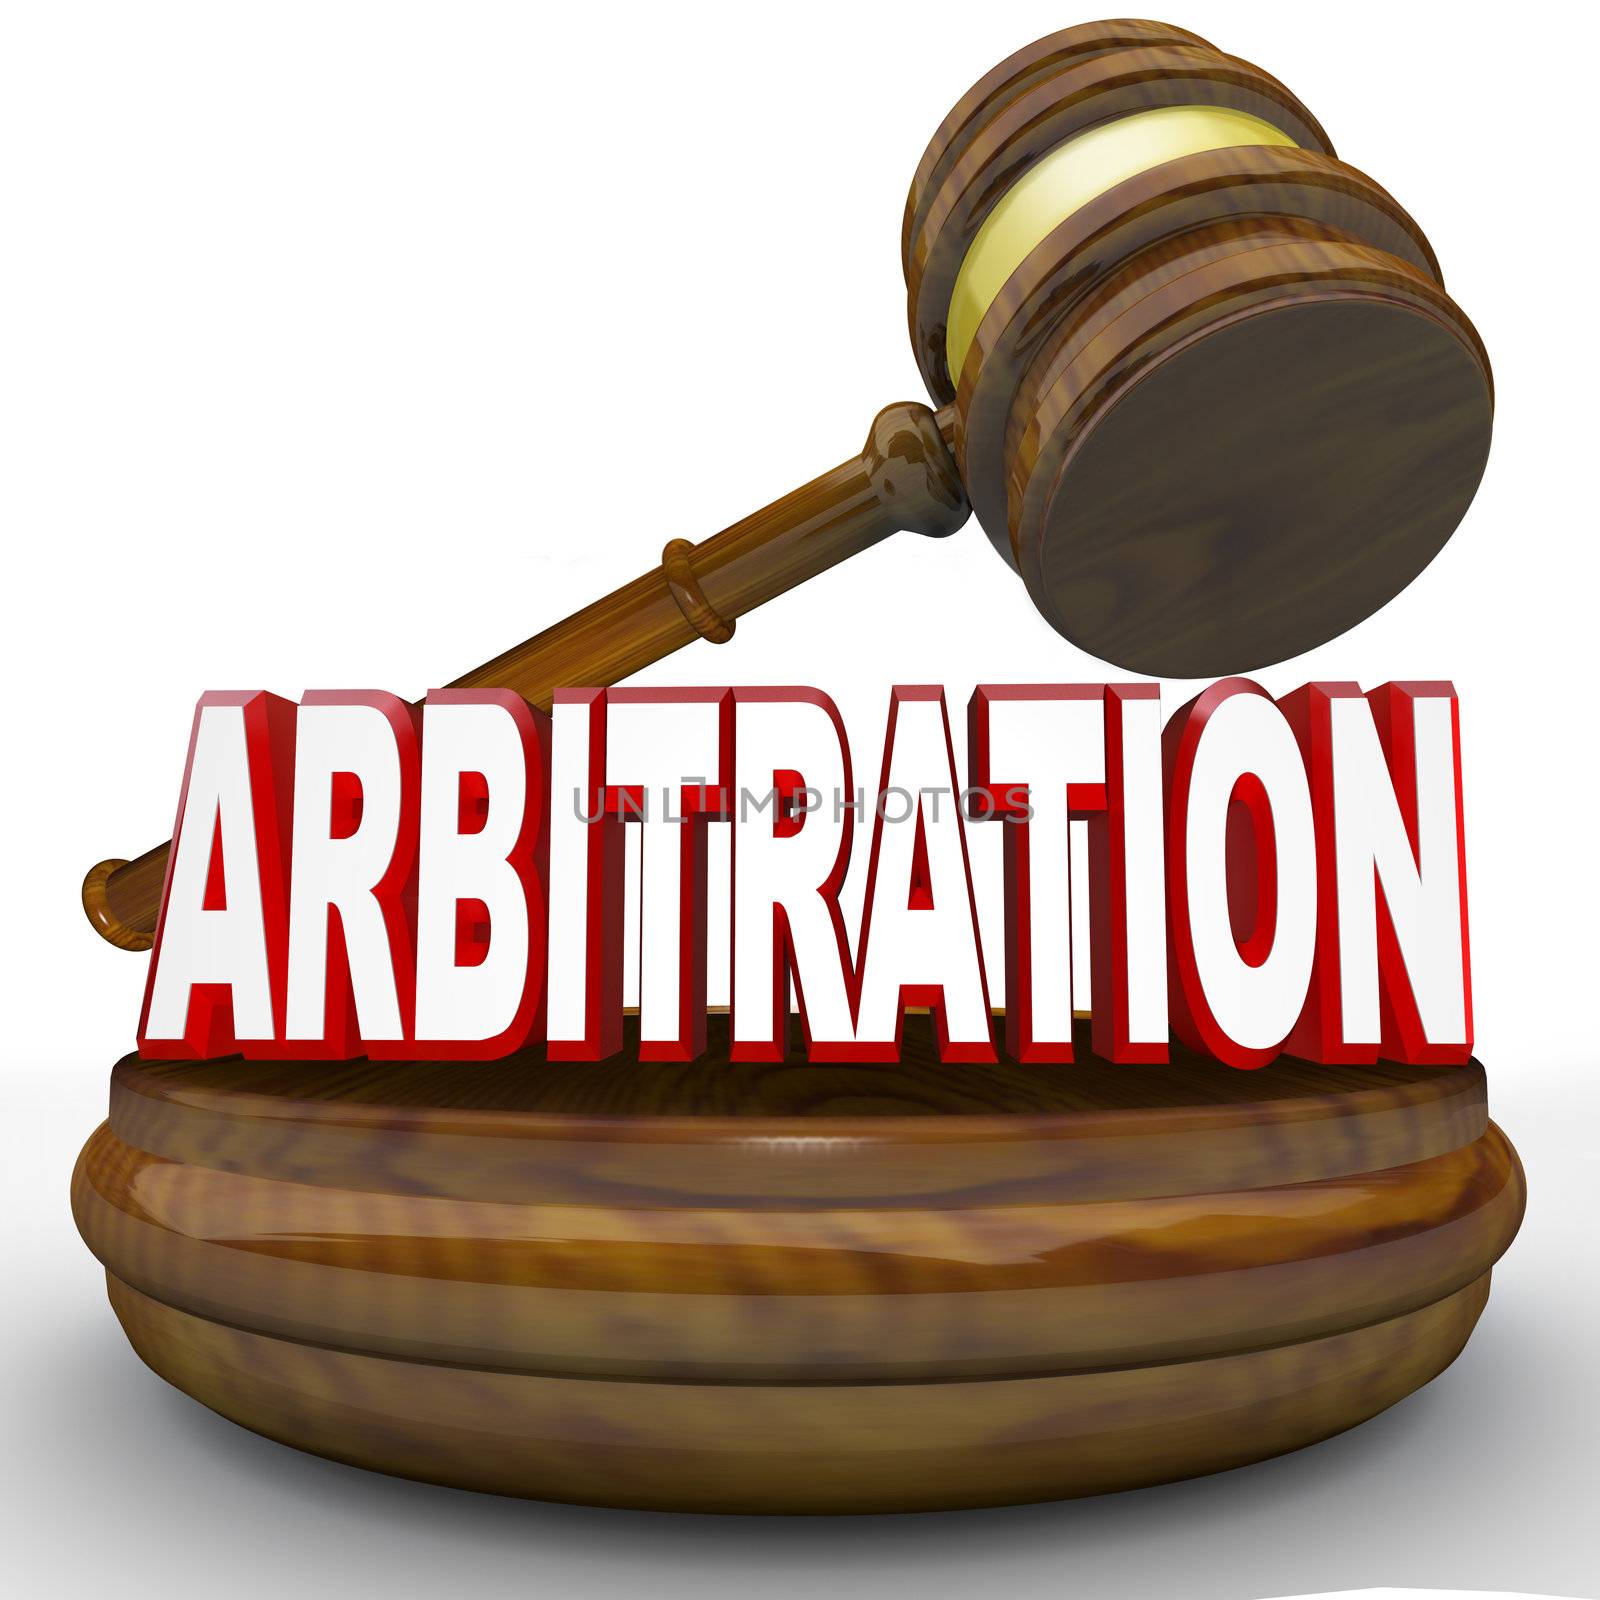 Arbitration - Word and Gavel for Settlement or Decision by iQoncept